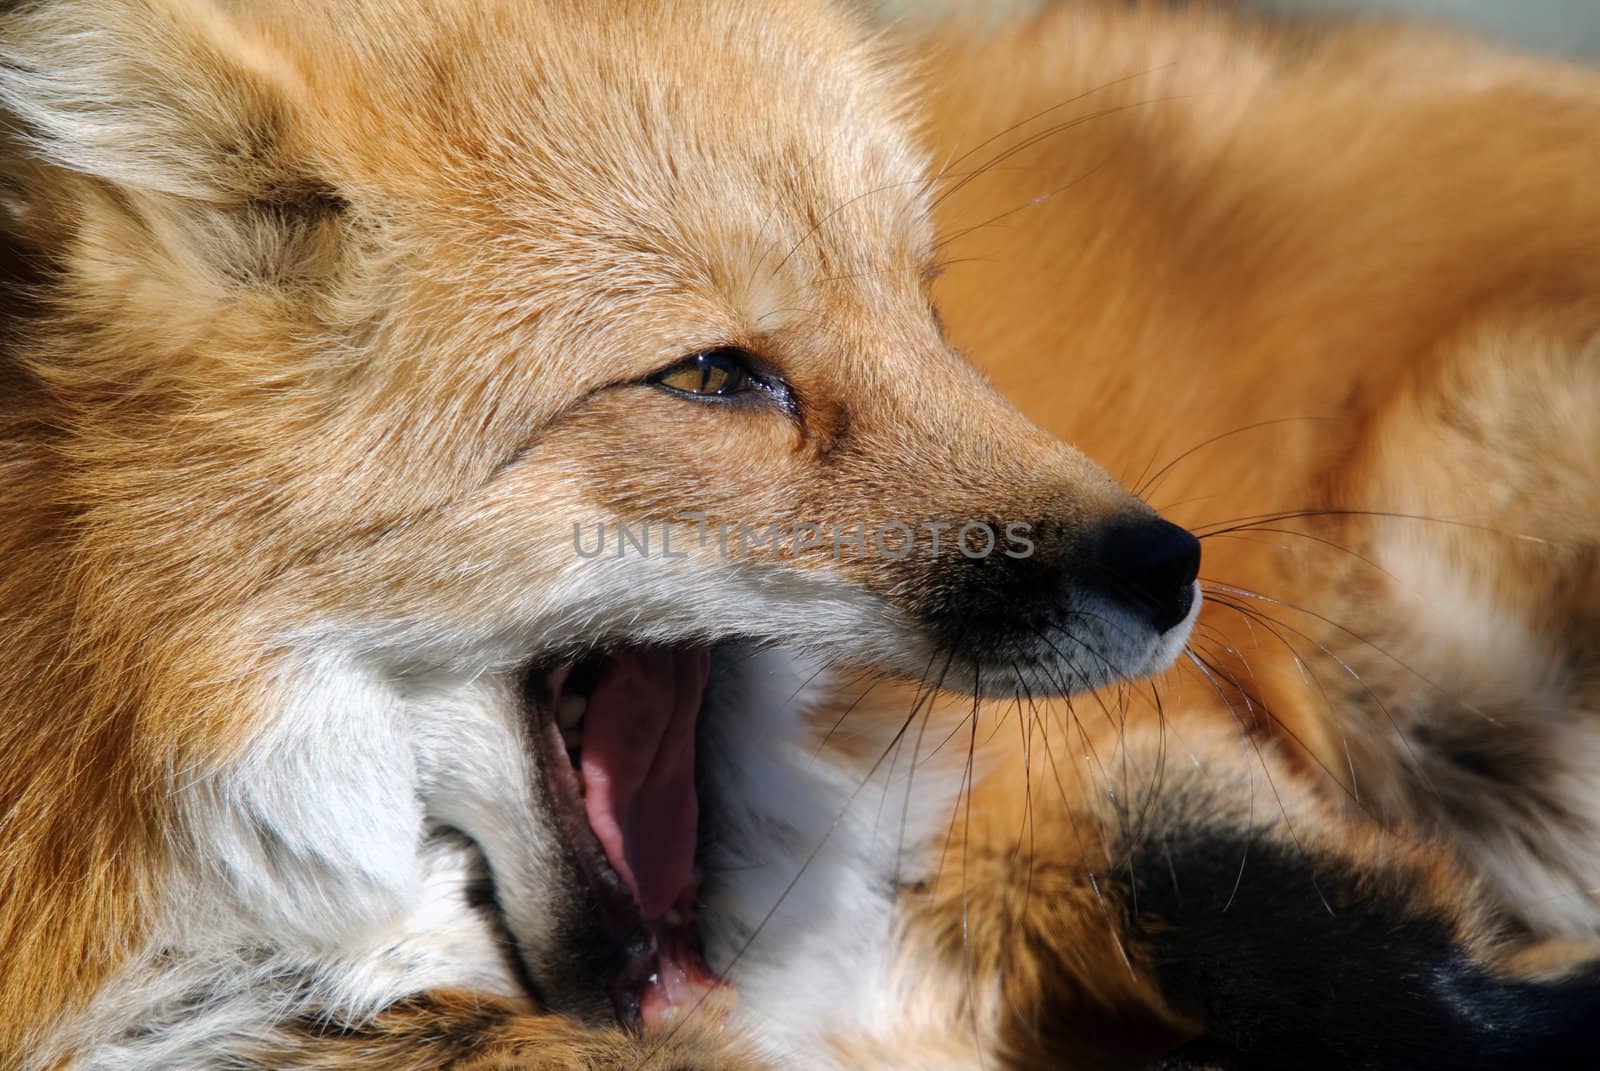 Close-up portrait of a beautiful wild Red Fox